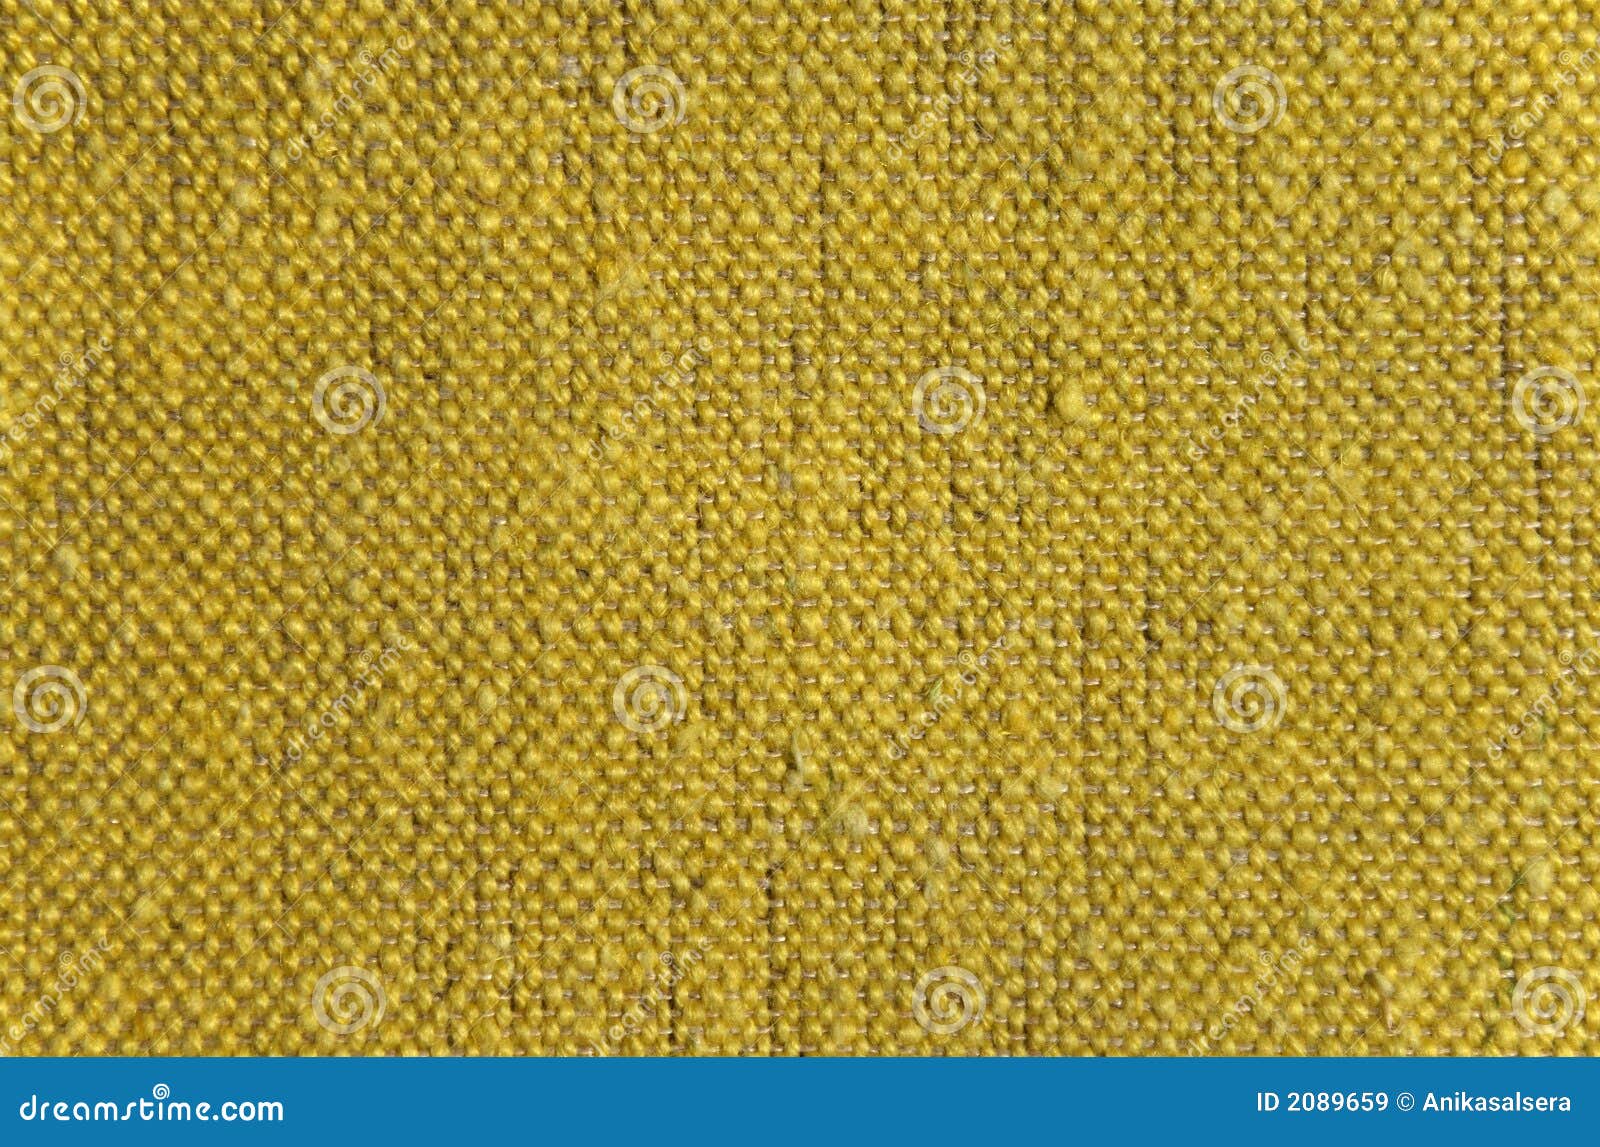 Rustic Linen Fabric Background Stock Image - Image of cloth, natural ...